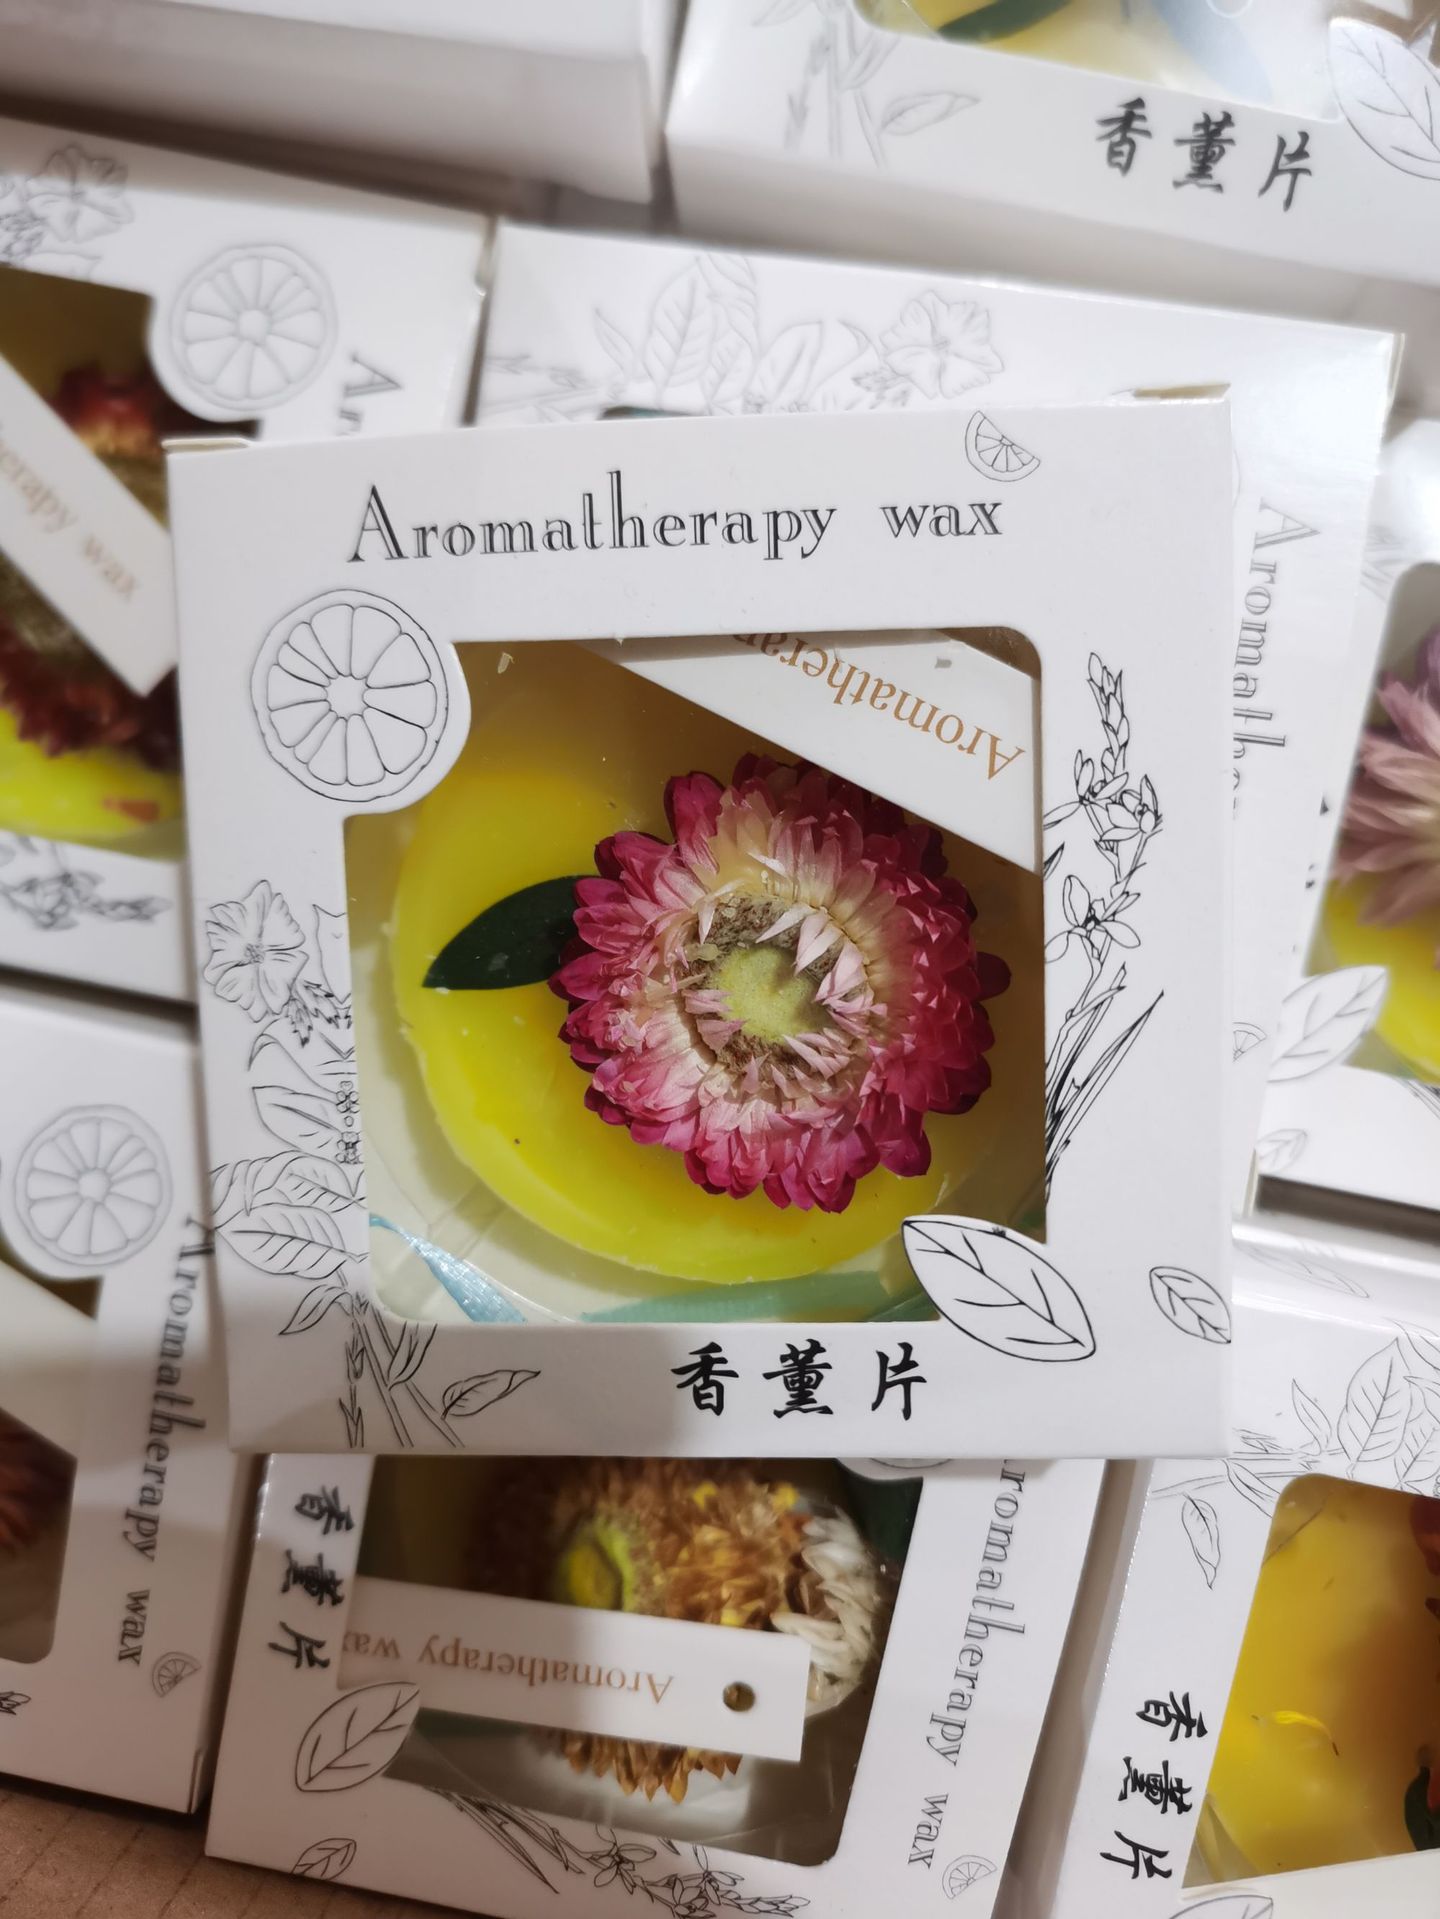 Creative Domestic Aromatherapy Wax Tablets Bedroom Wardrobe Solid Jasmine Scented Green Tea Toilet Air Fresh Dried Flower No Fire Aromatherapy Sheet